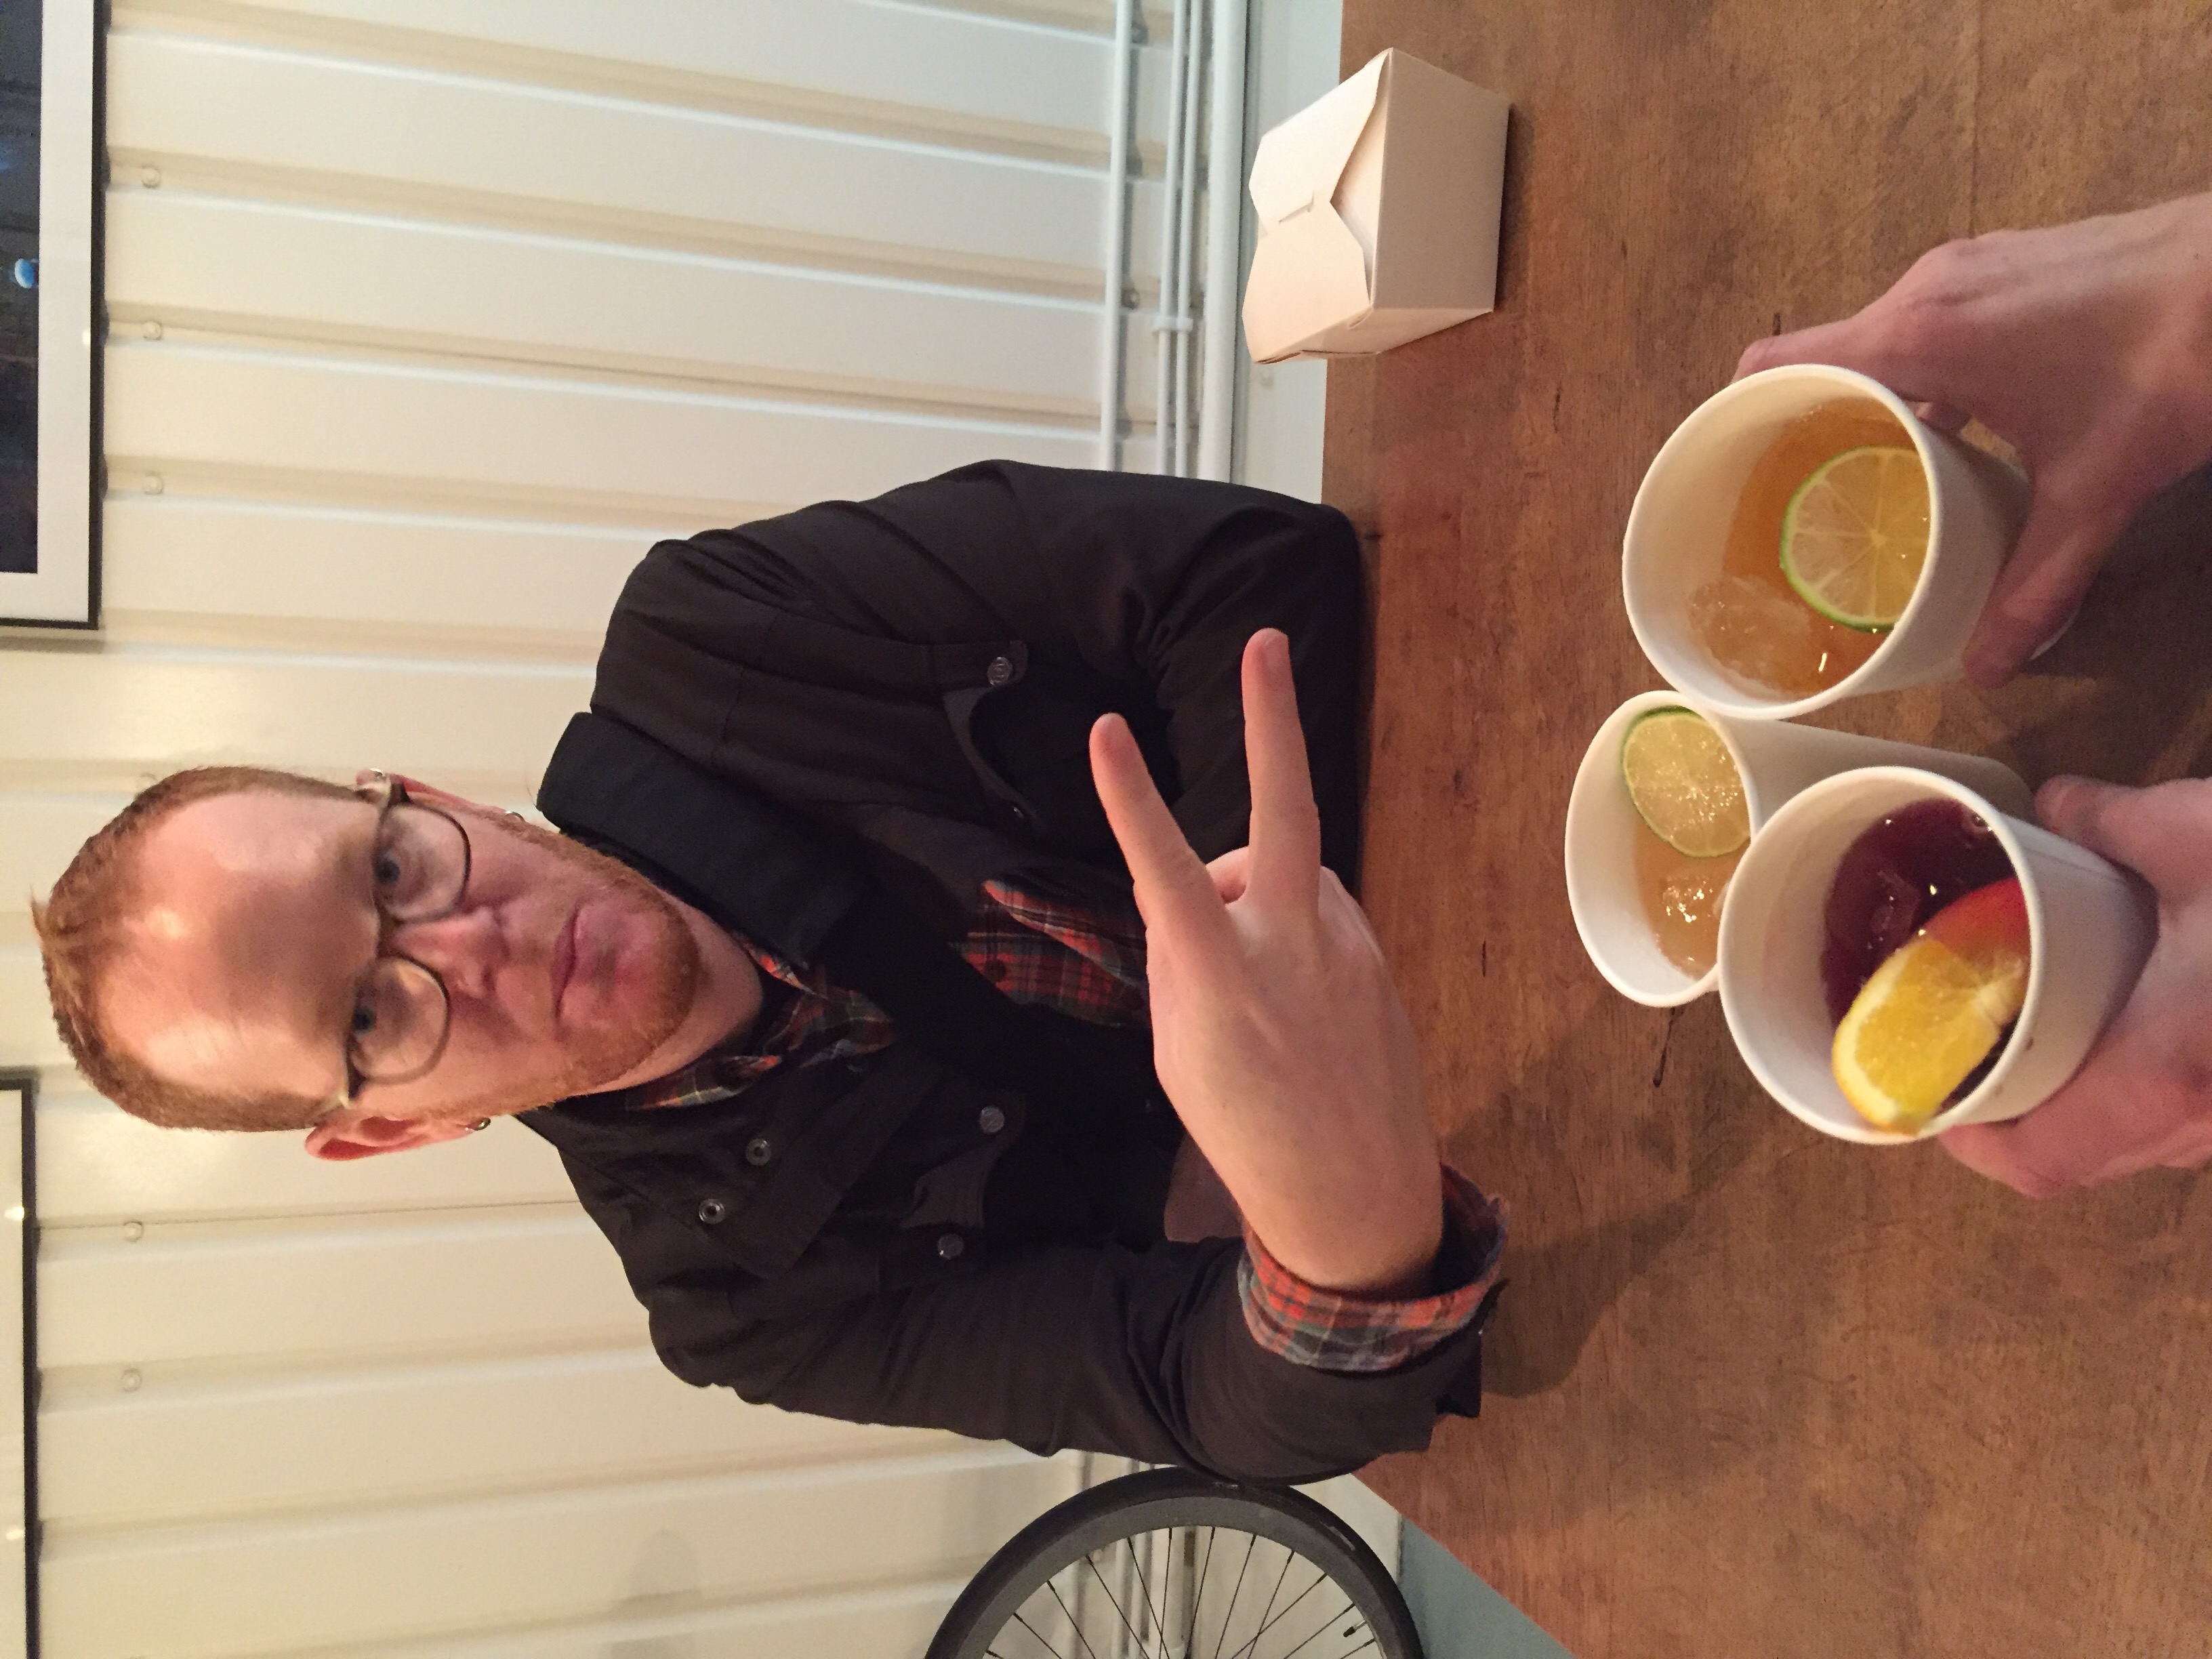 Robby enjoying some afternoon tea desserts on a visit to London